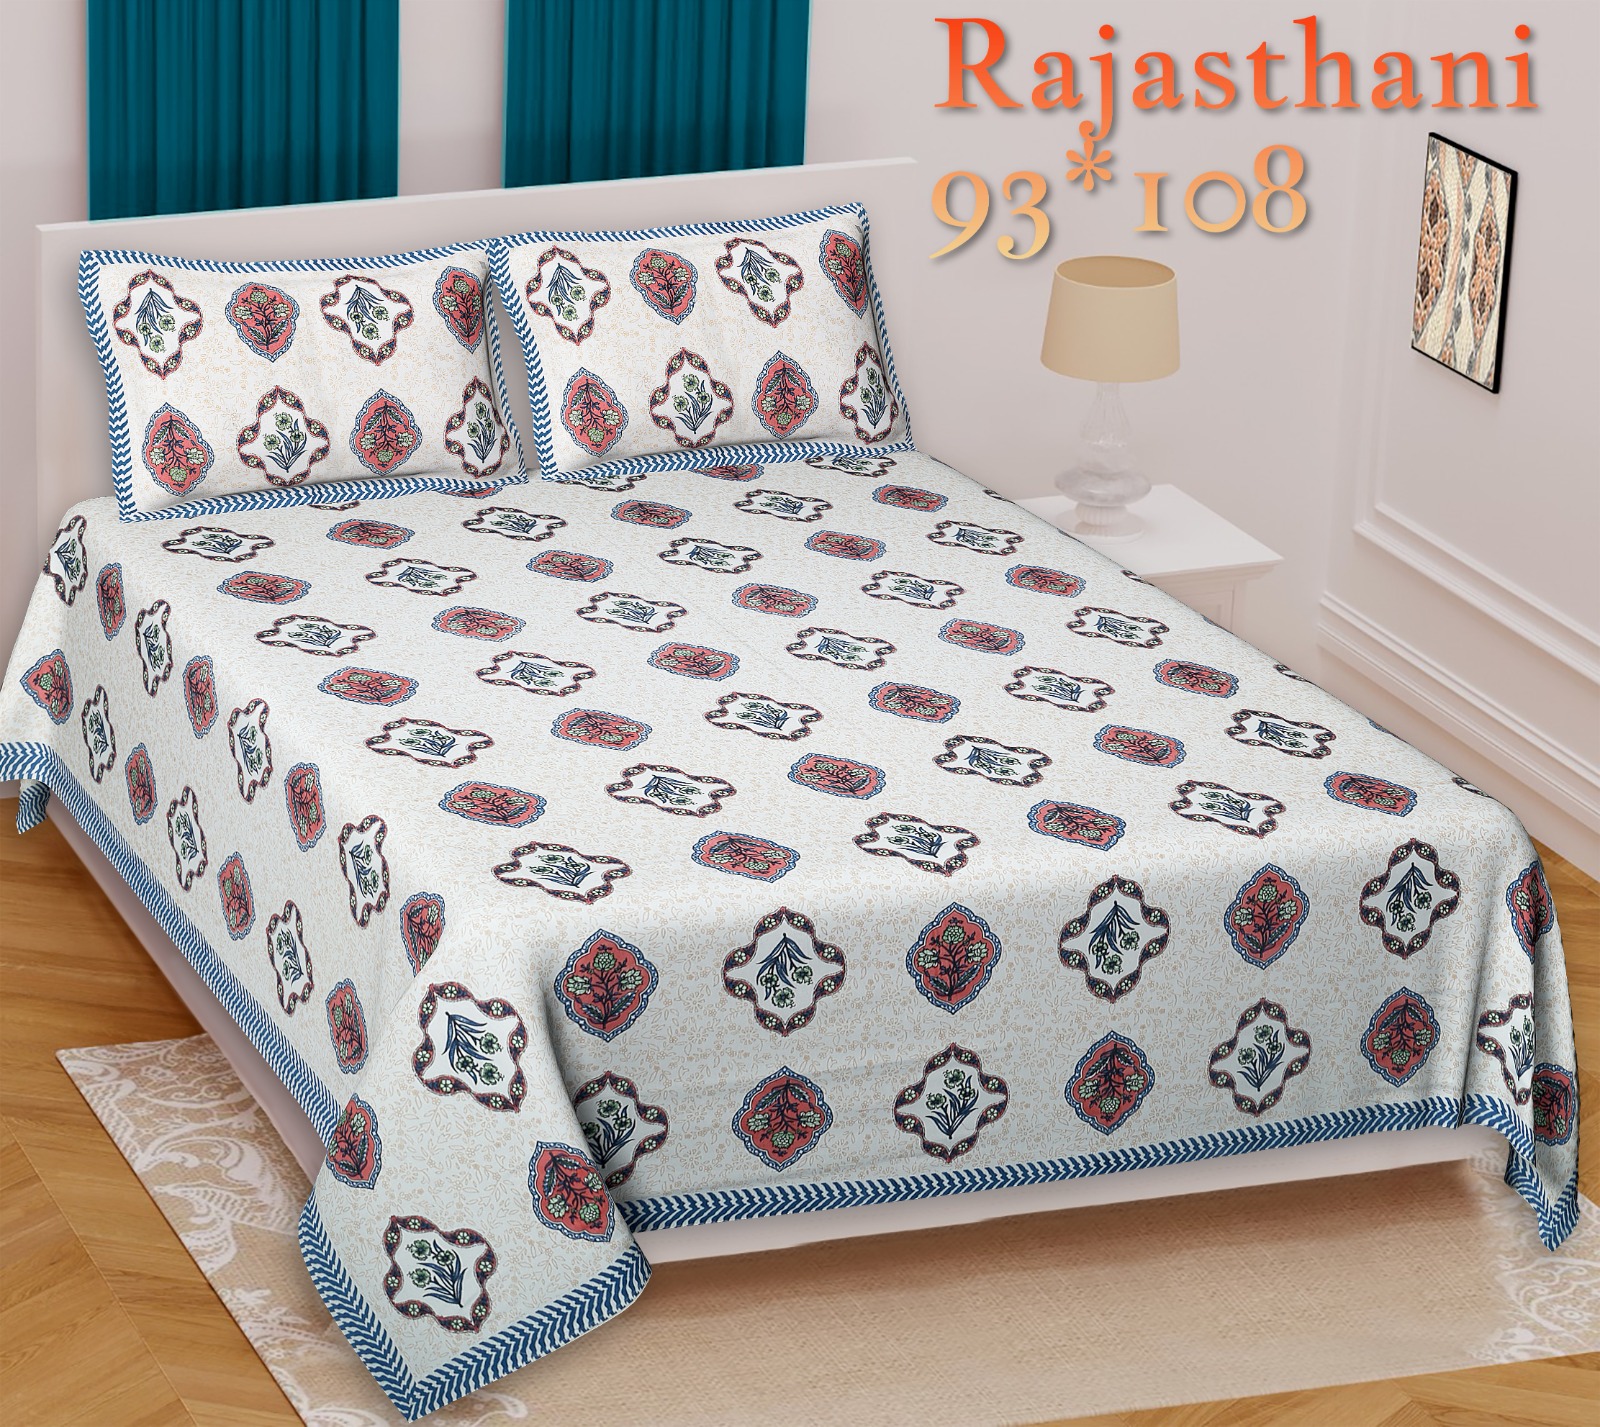 93x108 bed sheet with pillow cover